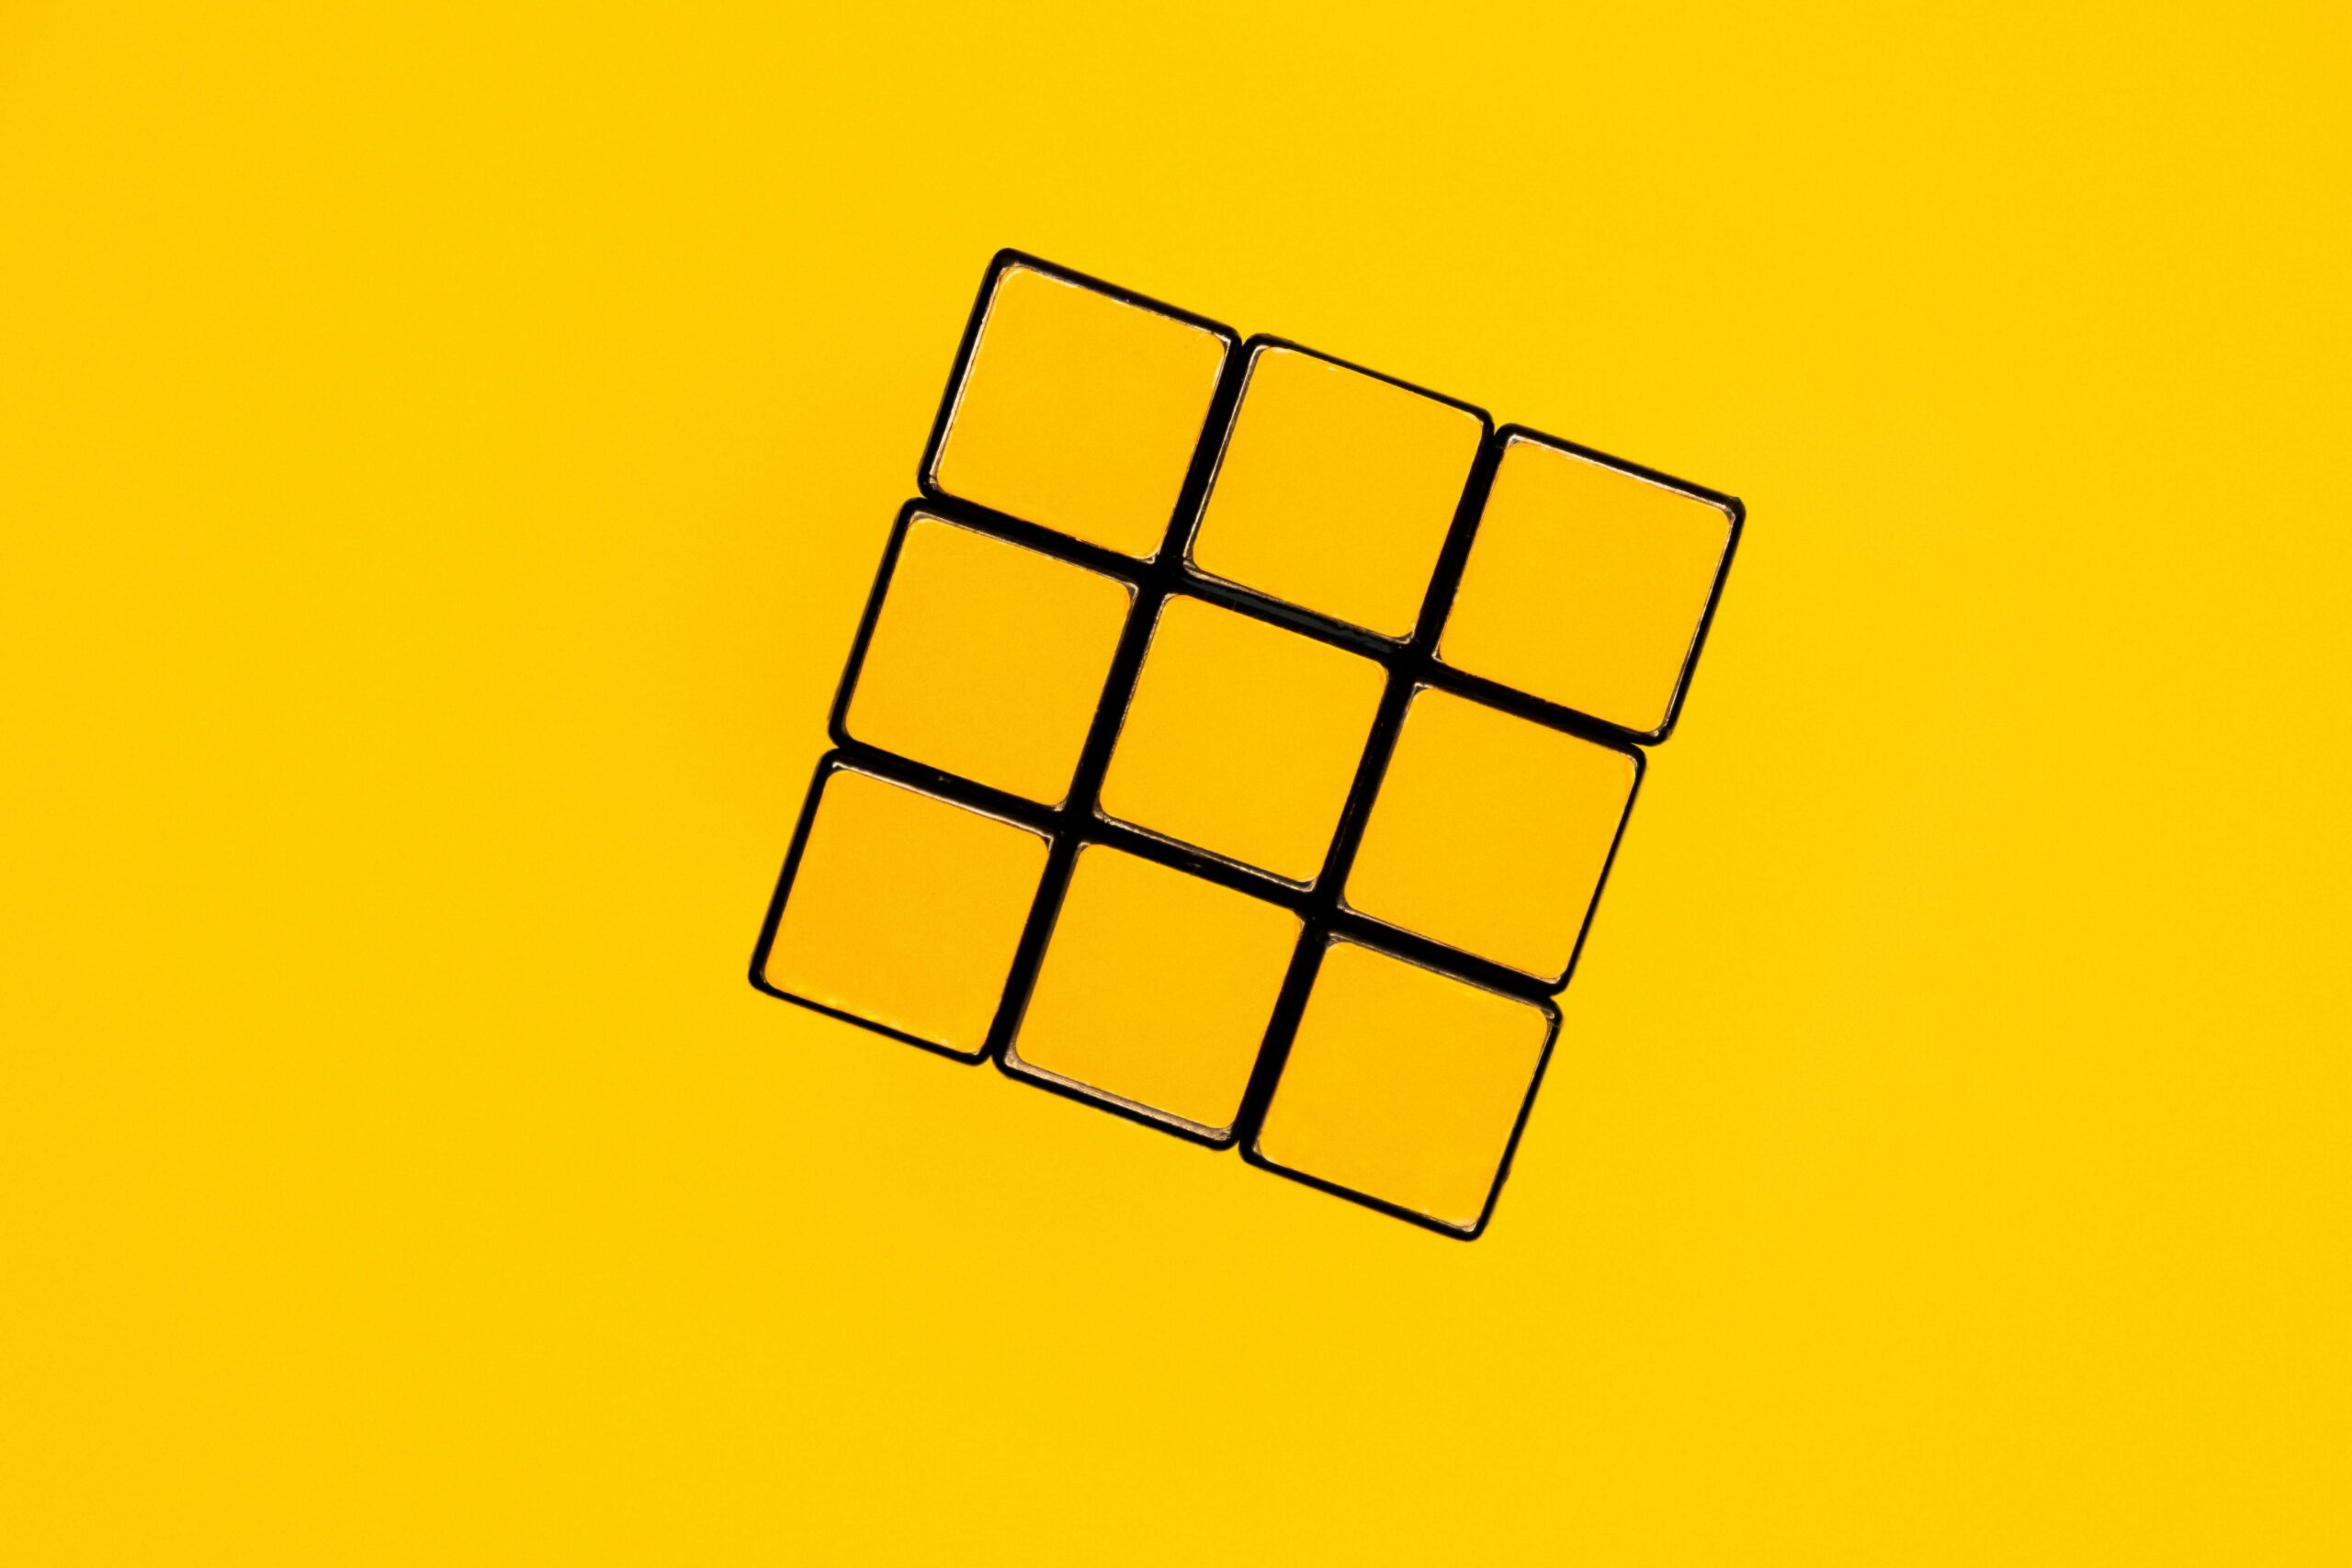 solved Rubik's cube with the yellow squares showing on a yellow background